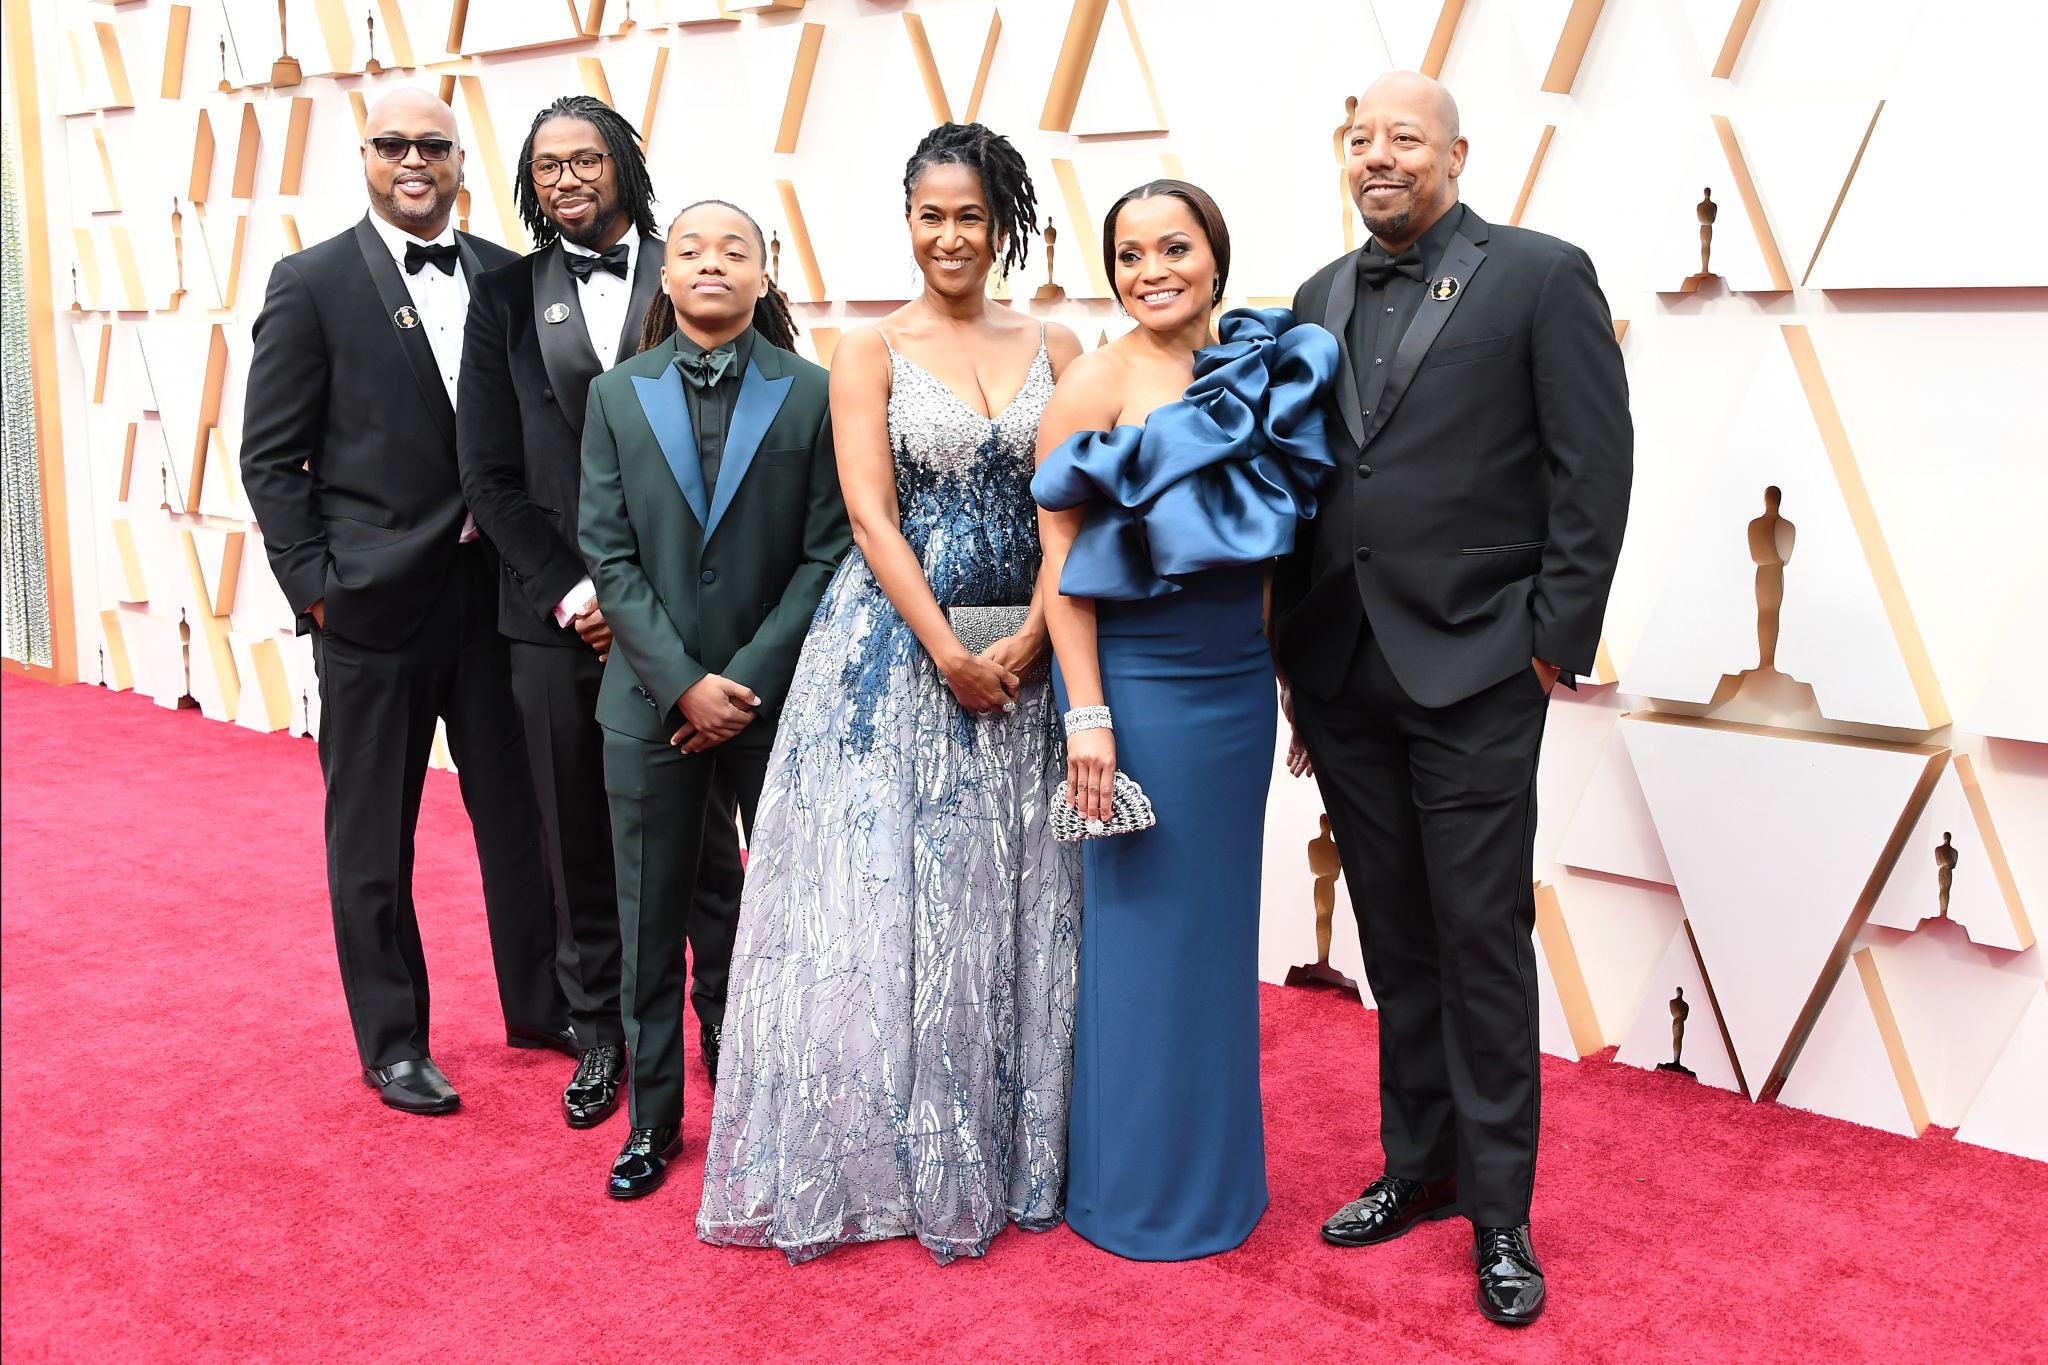 Houston-area student shows off his dreadlocks on the Oscars red carpet - Houston Chronicle